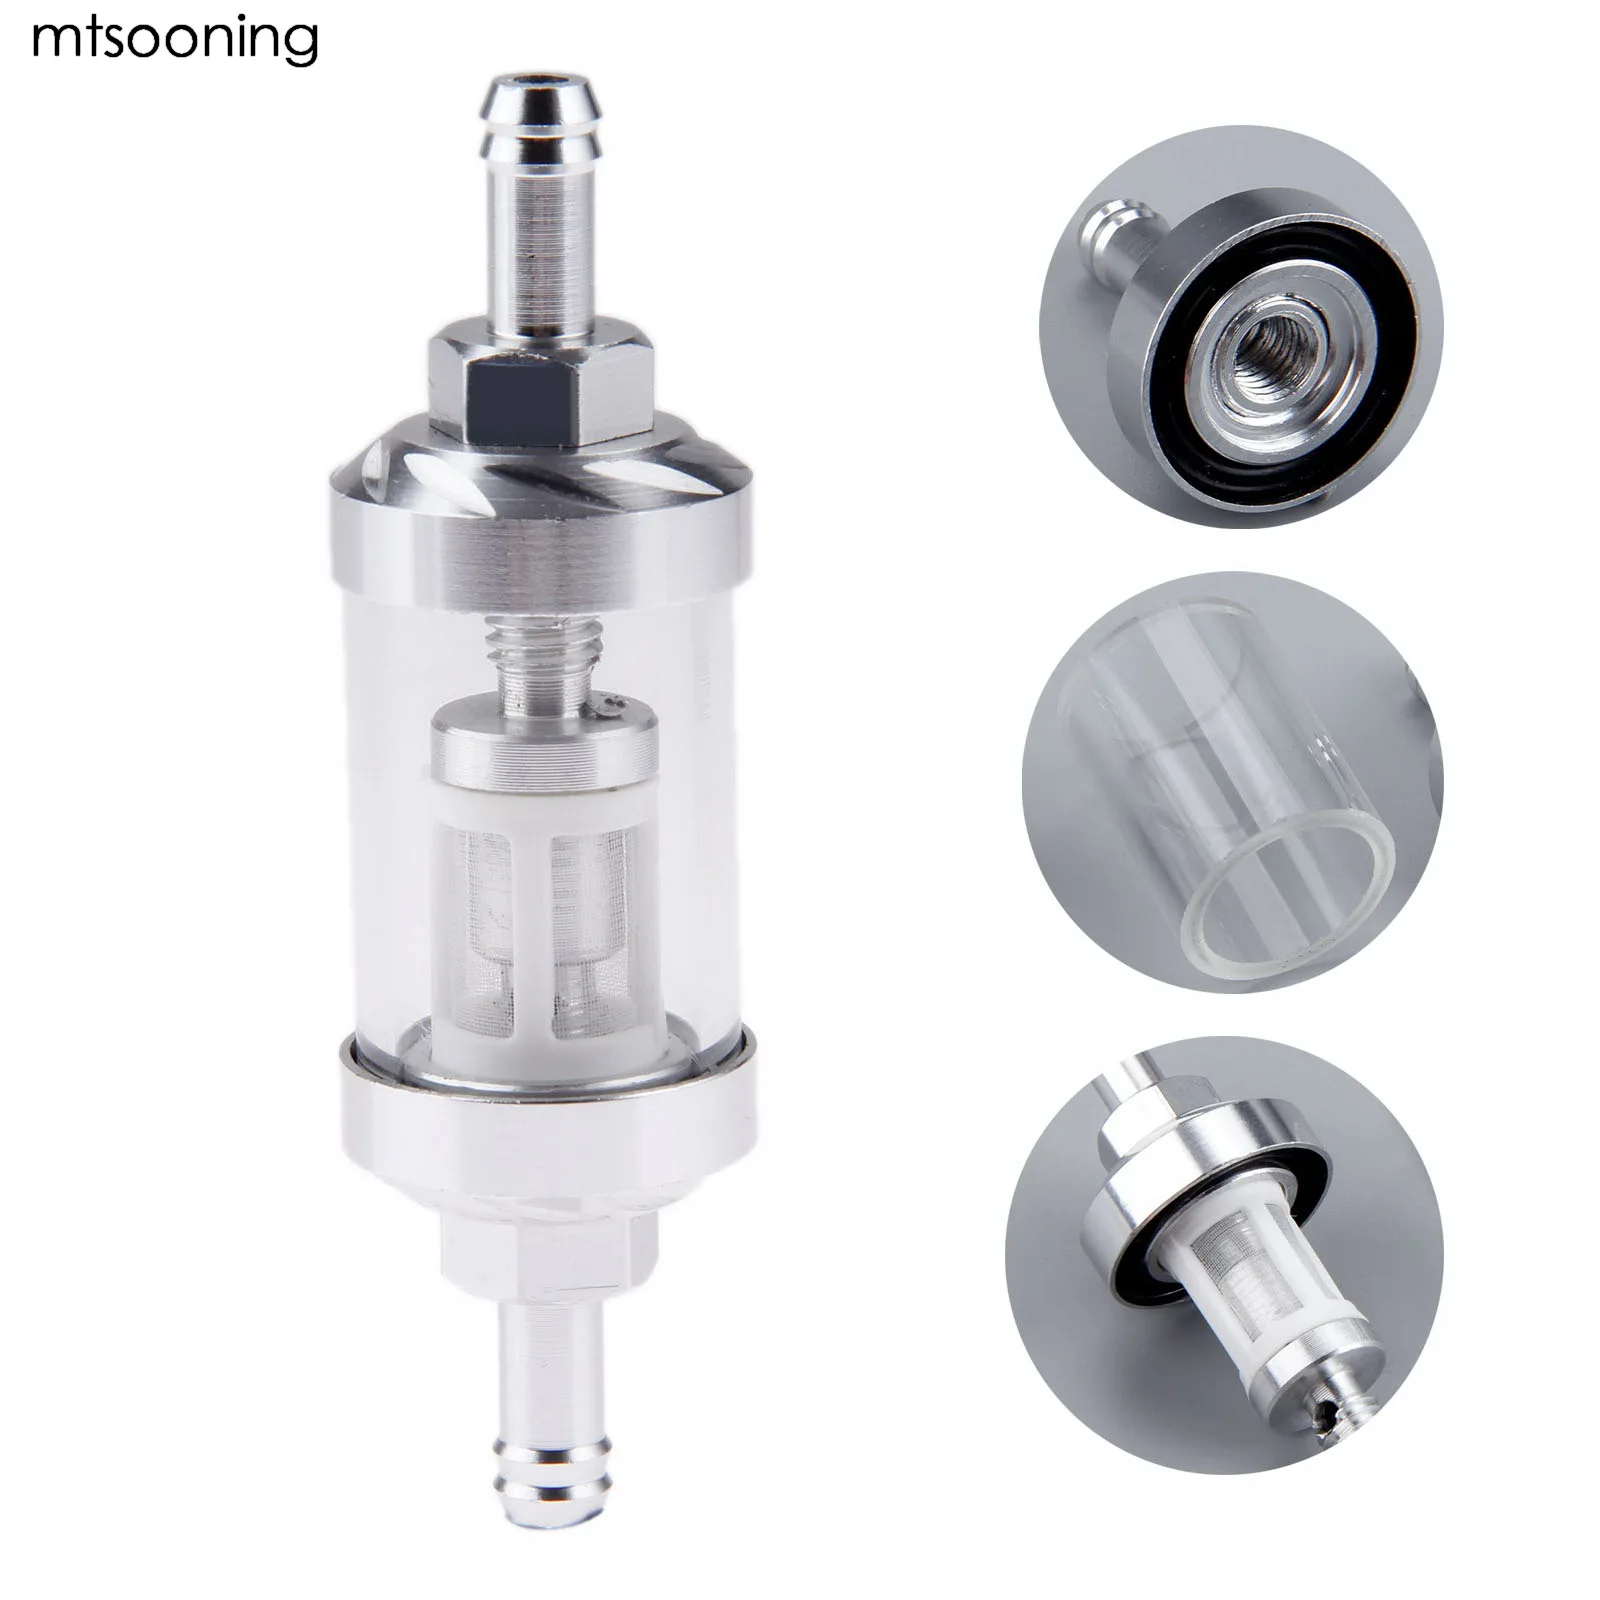 mtsooning 8mm 5/16" Motorcycle Inner Fuel Filter Silver Moto Gasoline Filters New Universal Oil Gas Fuel Filter High Quality